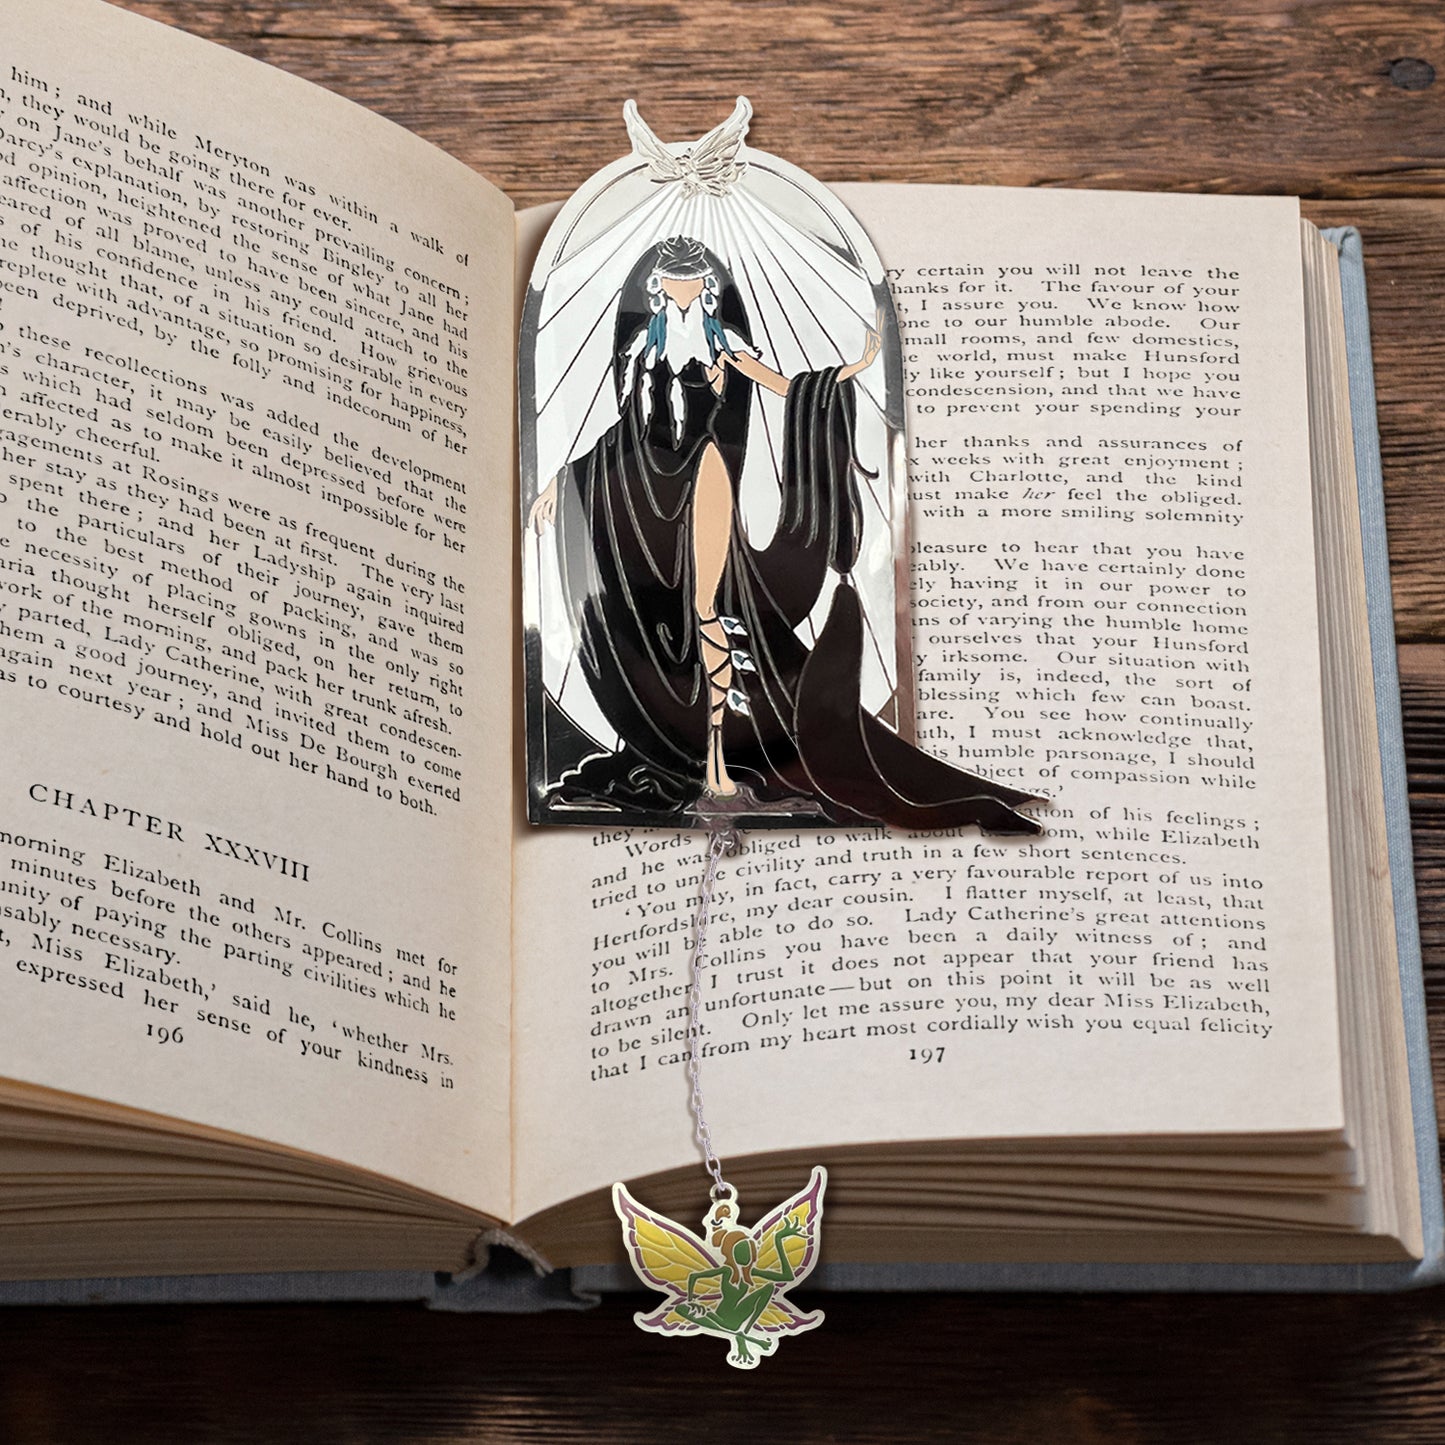 Close up view of a bookmark on the pages of a hardcover book. The bookmark depicts the ElfQuest character Winnowill, dressed in black robes with white rays above her. A chain hangs down from the bottom of the bookmark, and a green and yellow charm shaped like a fairy is attached to the end.